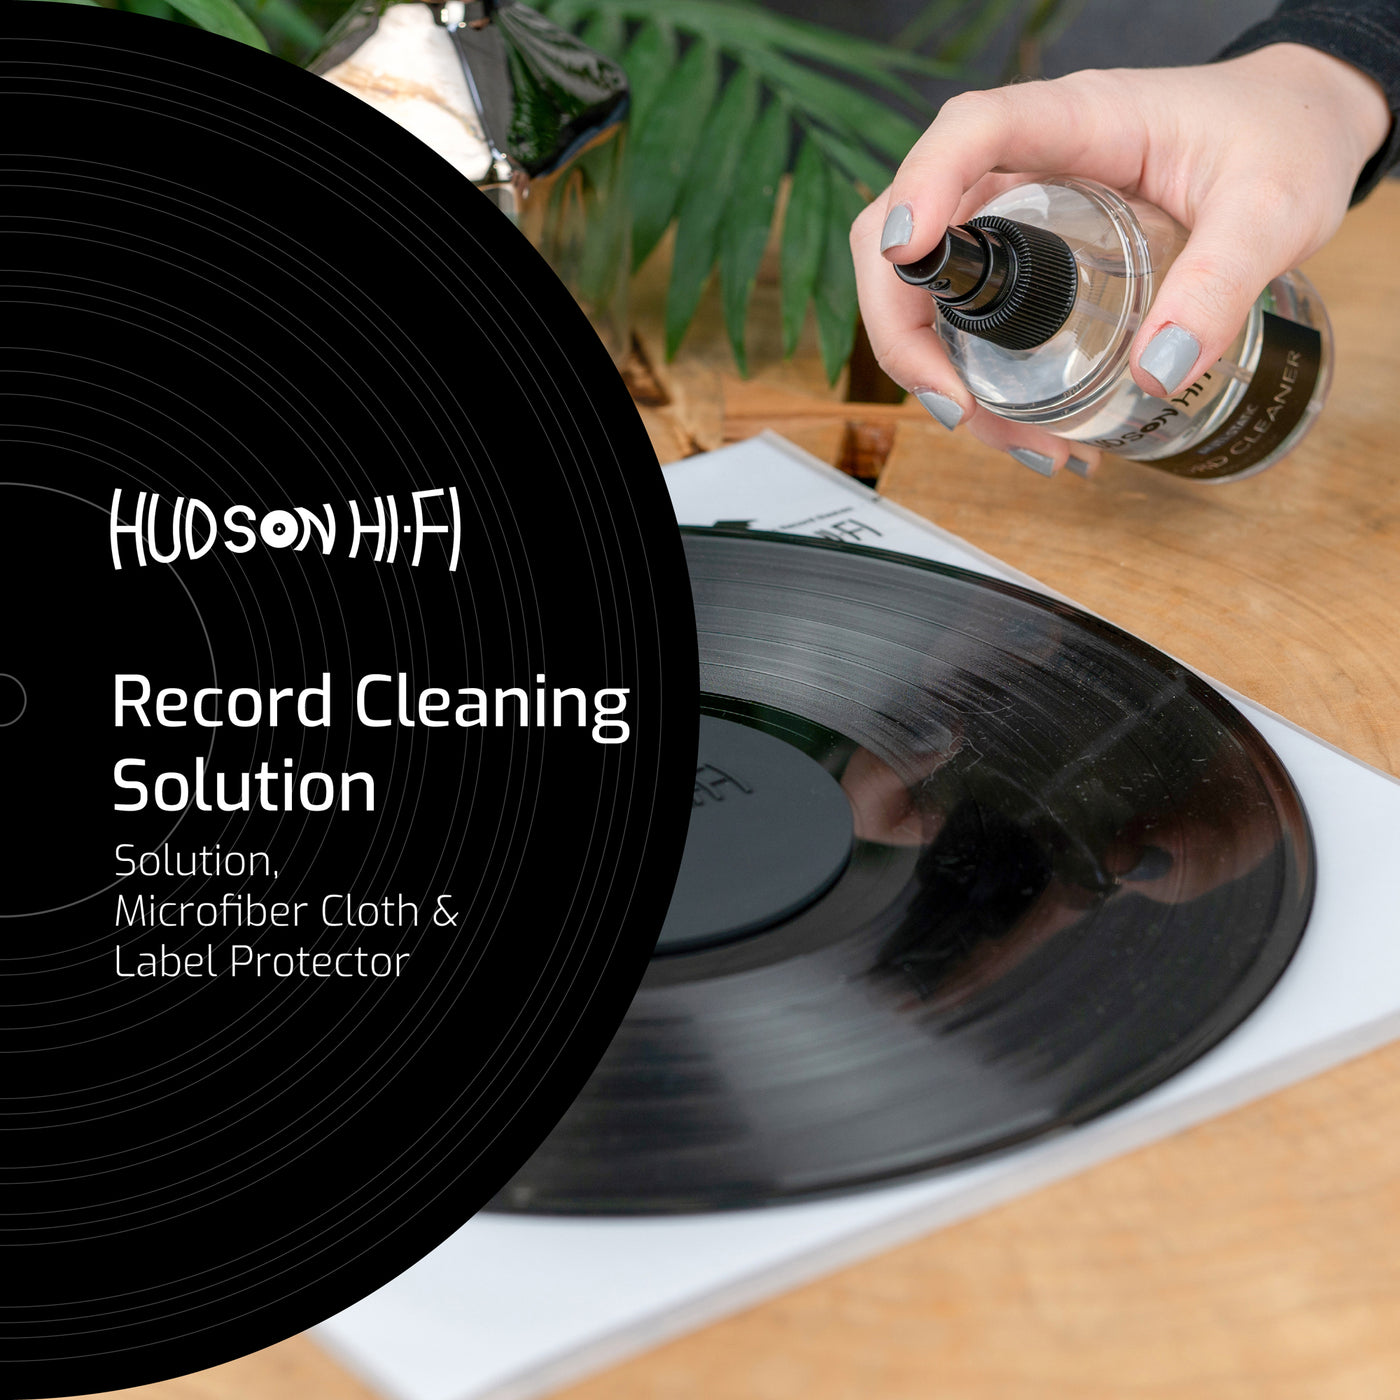 Hudson Hi-Fi Vinyl Record Cleaning Fluid Kit - Label Protector Soft Mesh and Liquid Solution